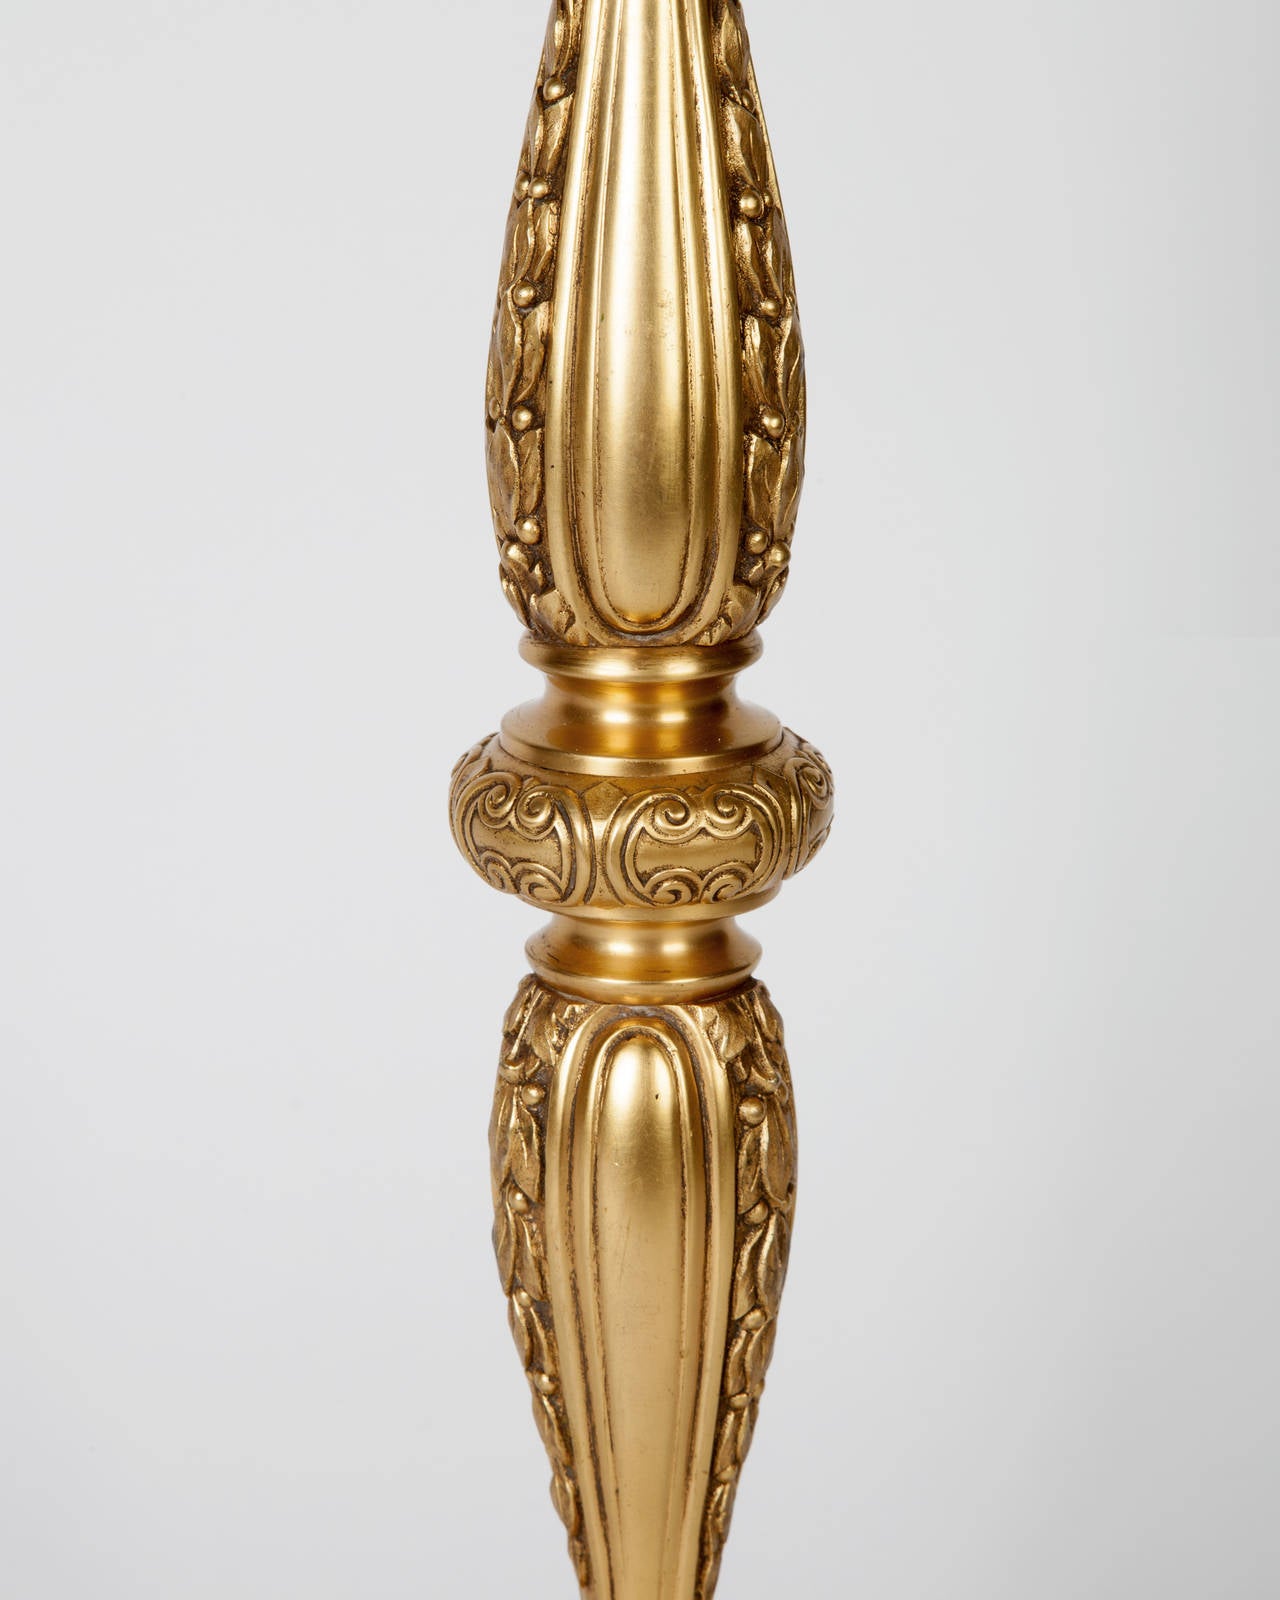 American Gilded Baluster Form Lamp with Bellflowers Signed by Sterling Bronze, c. 1910s For Sale